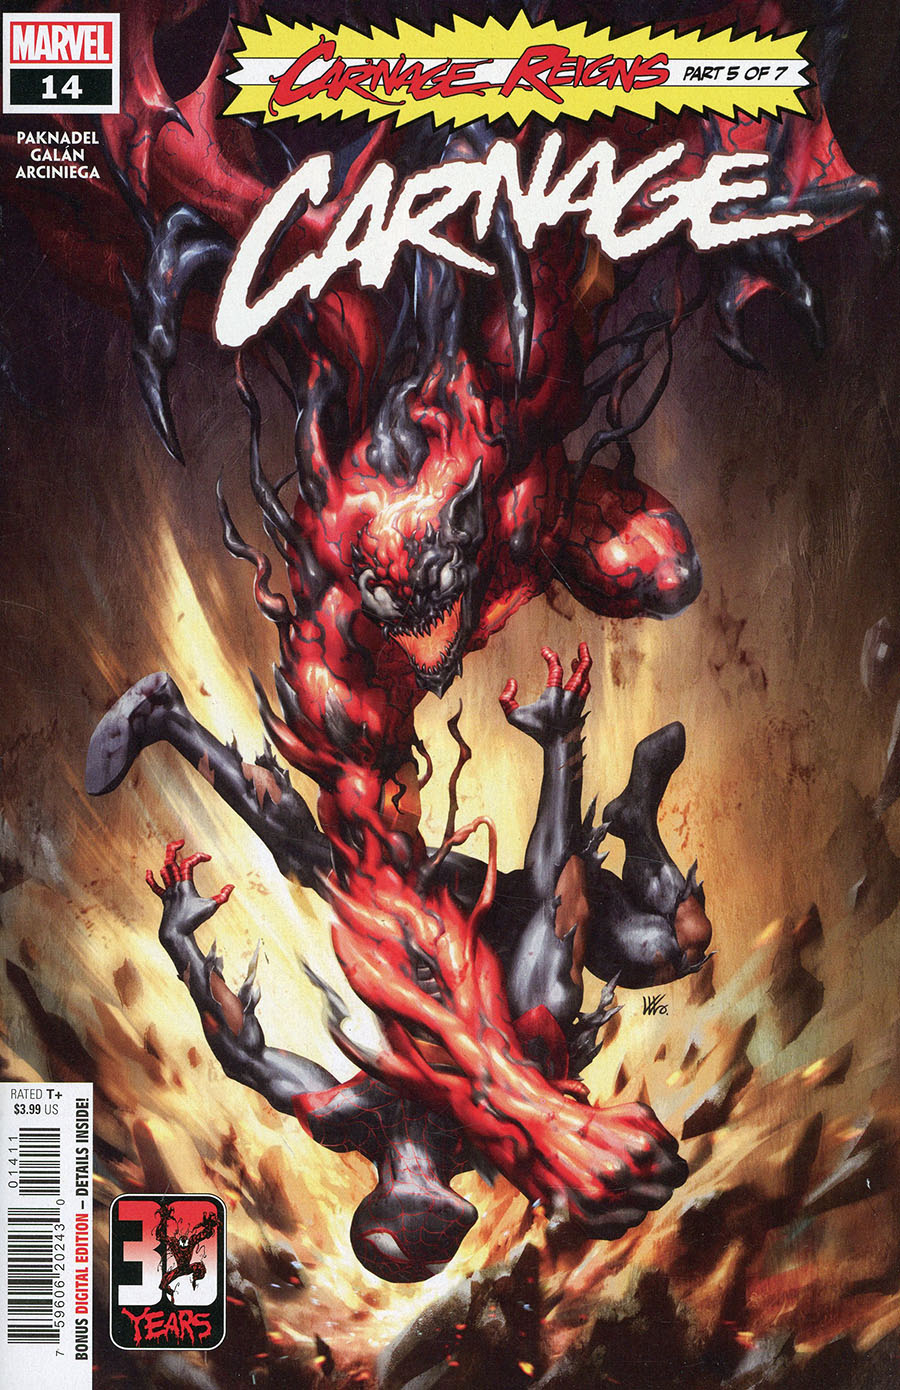 Carnage Vol 3 #14 Cover A Regular Kendrick kunkka Lim Cover (Carnage Reigns Part 5)